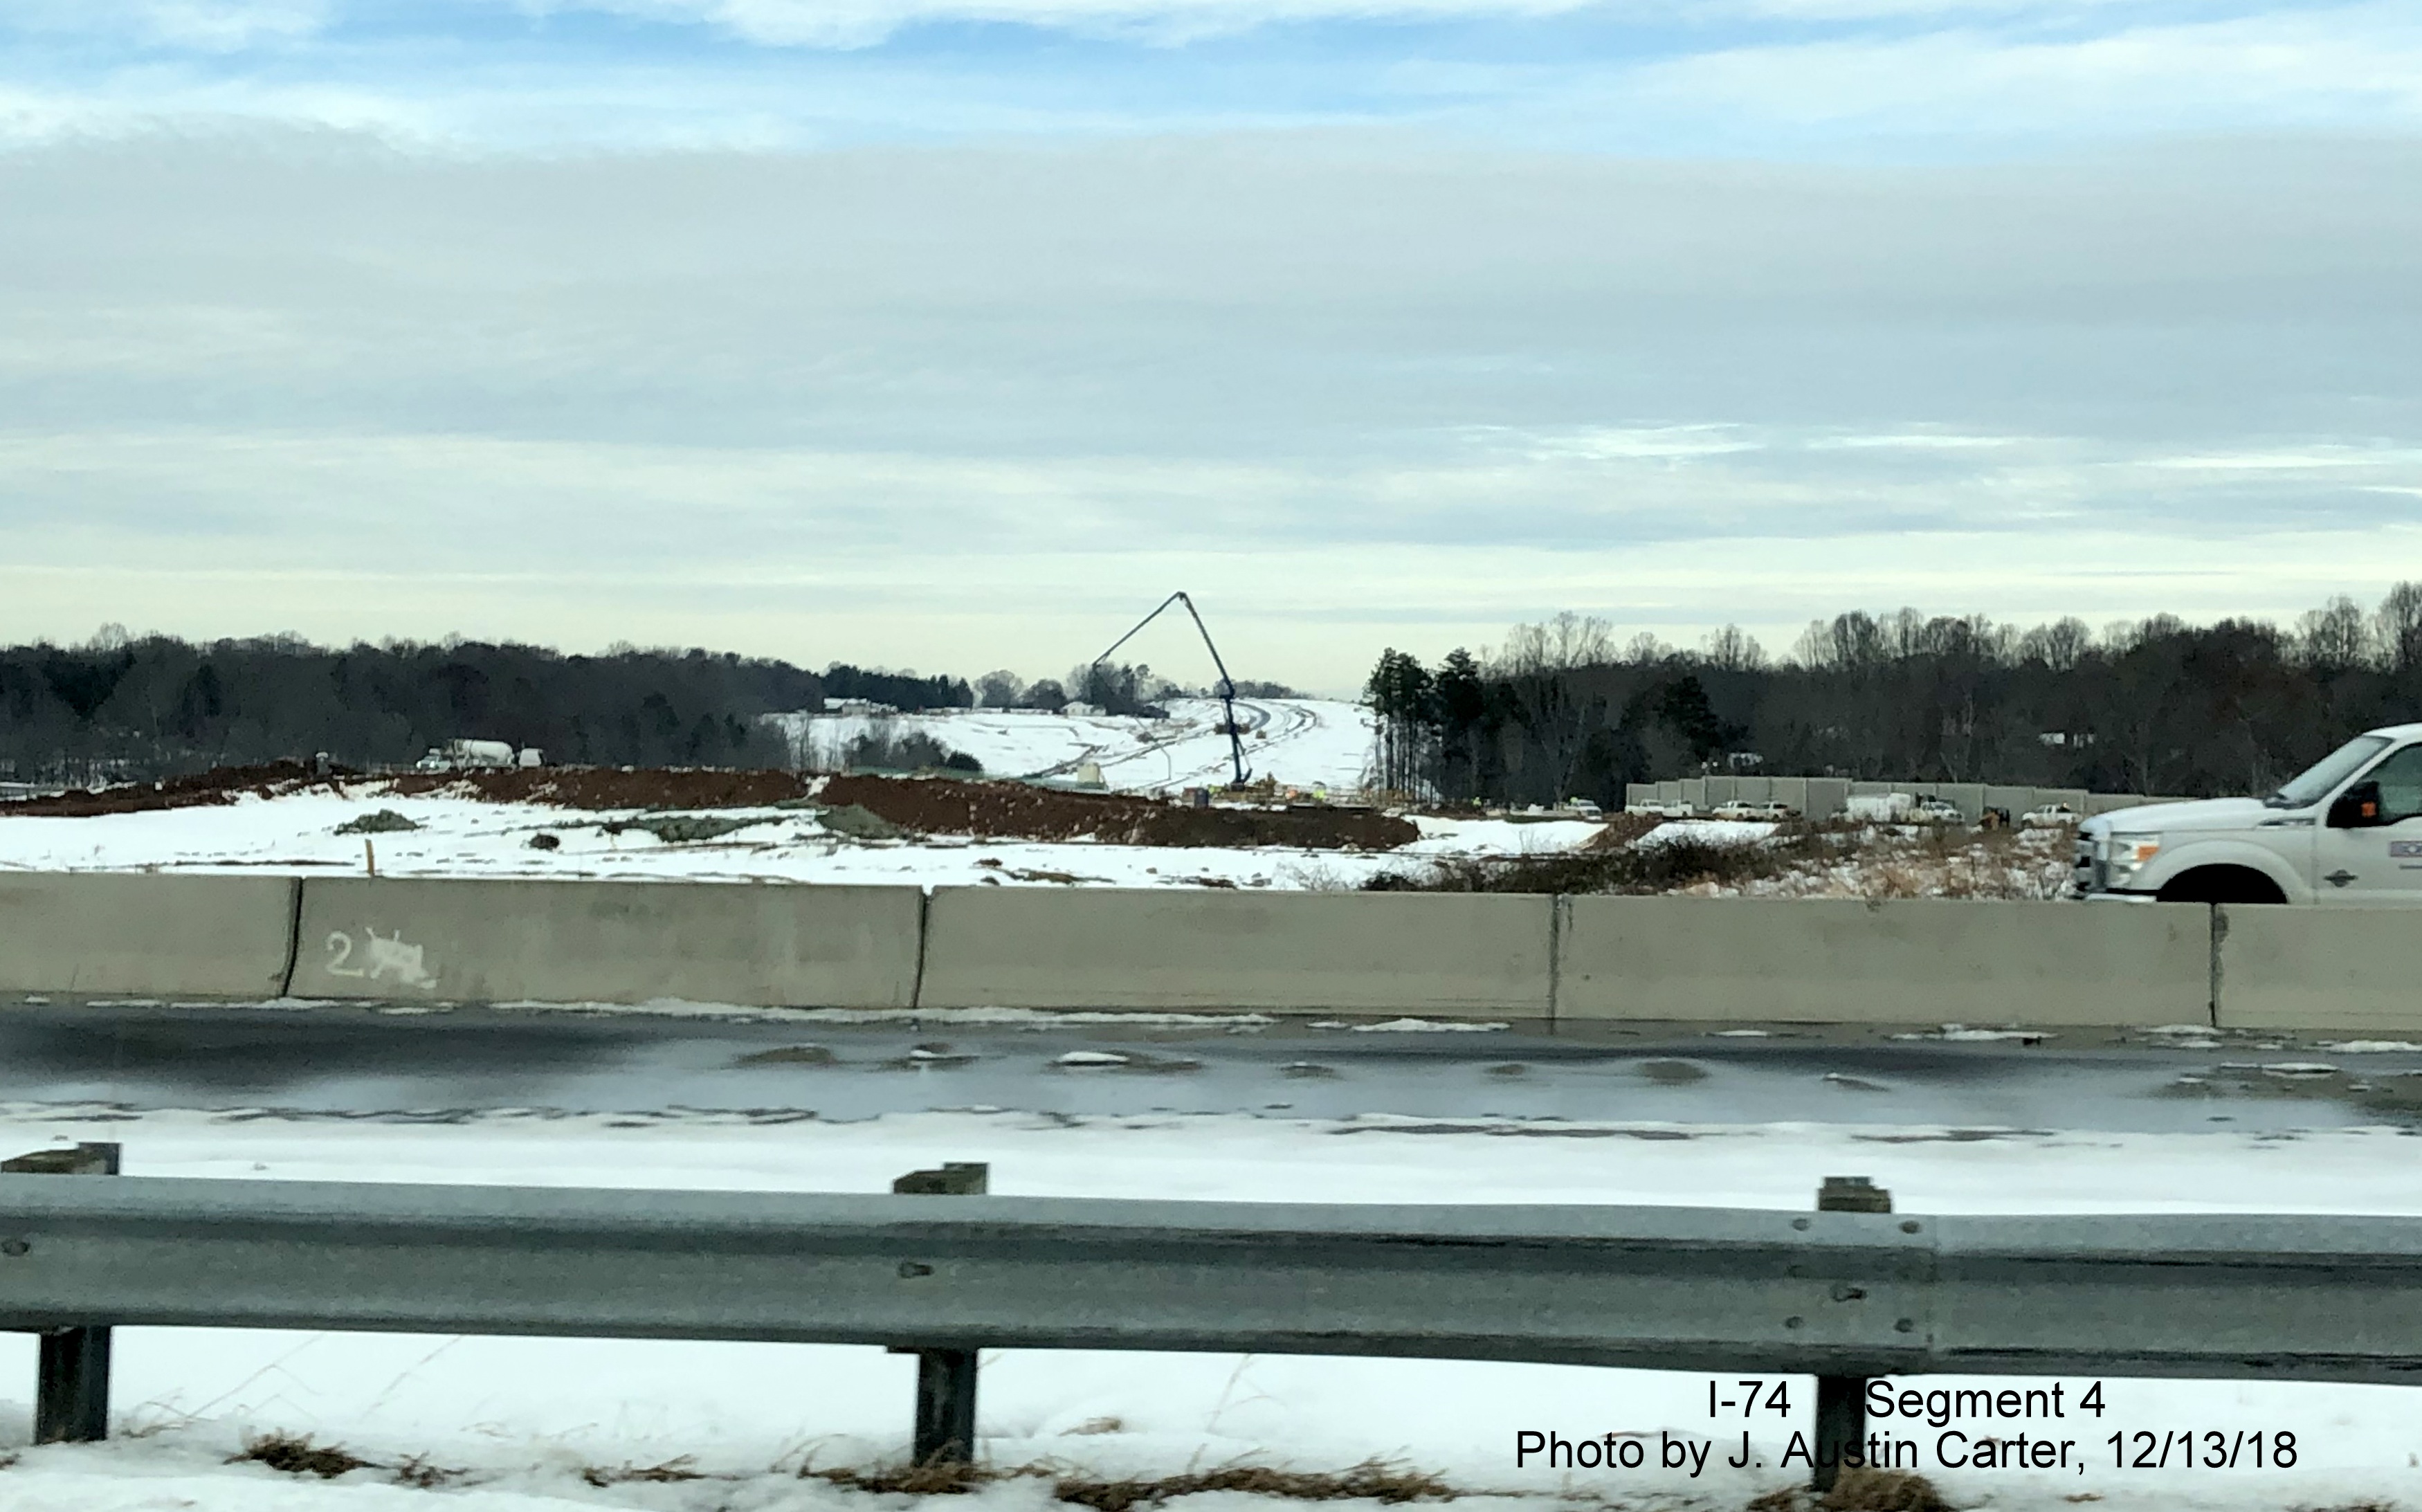 Image of construction of Future I-74/Winston-Salem Northern Beltway north of future interchange with Business 40/US 421, by J. Austin Carter